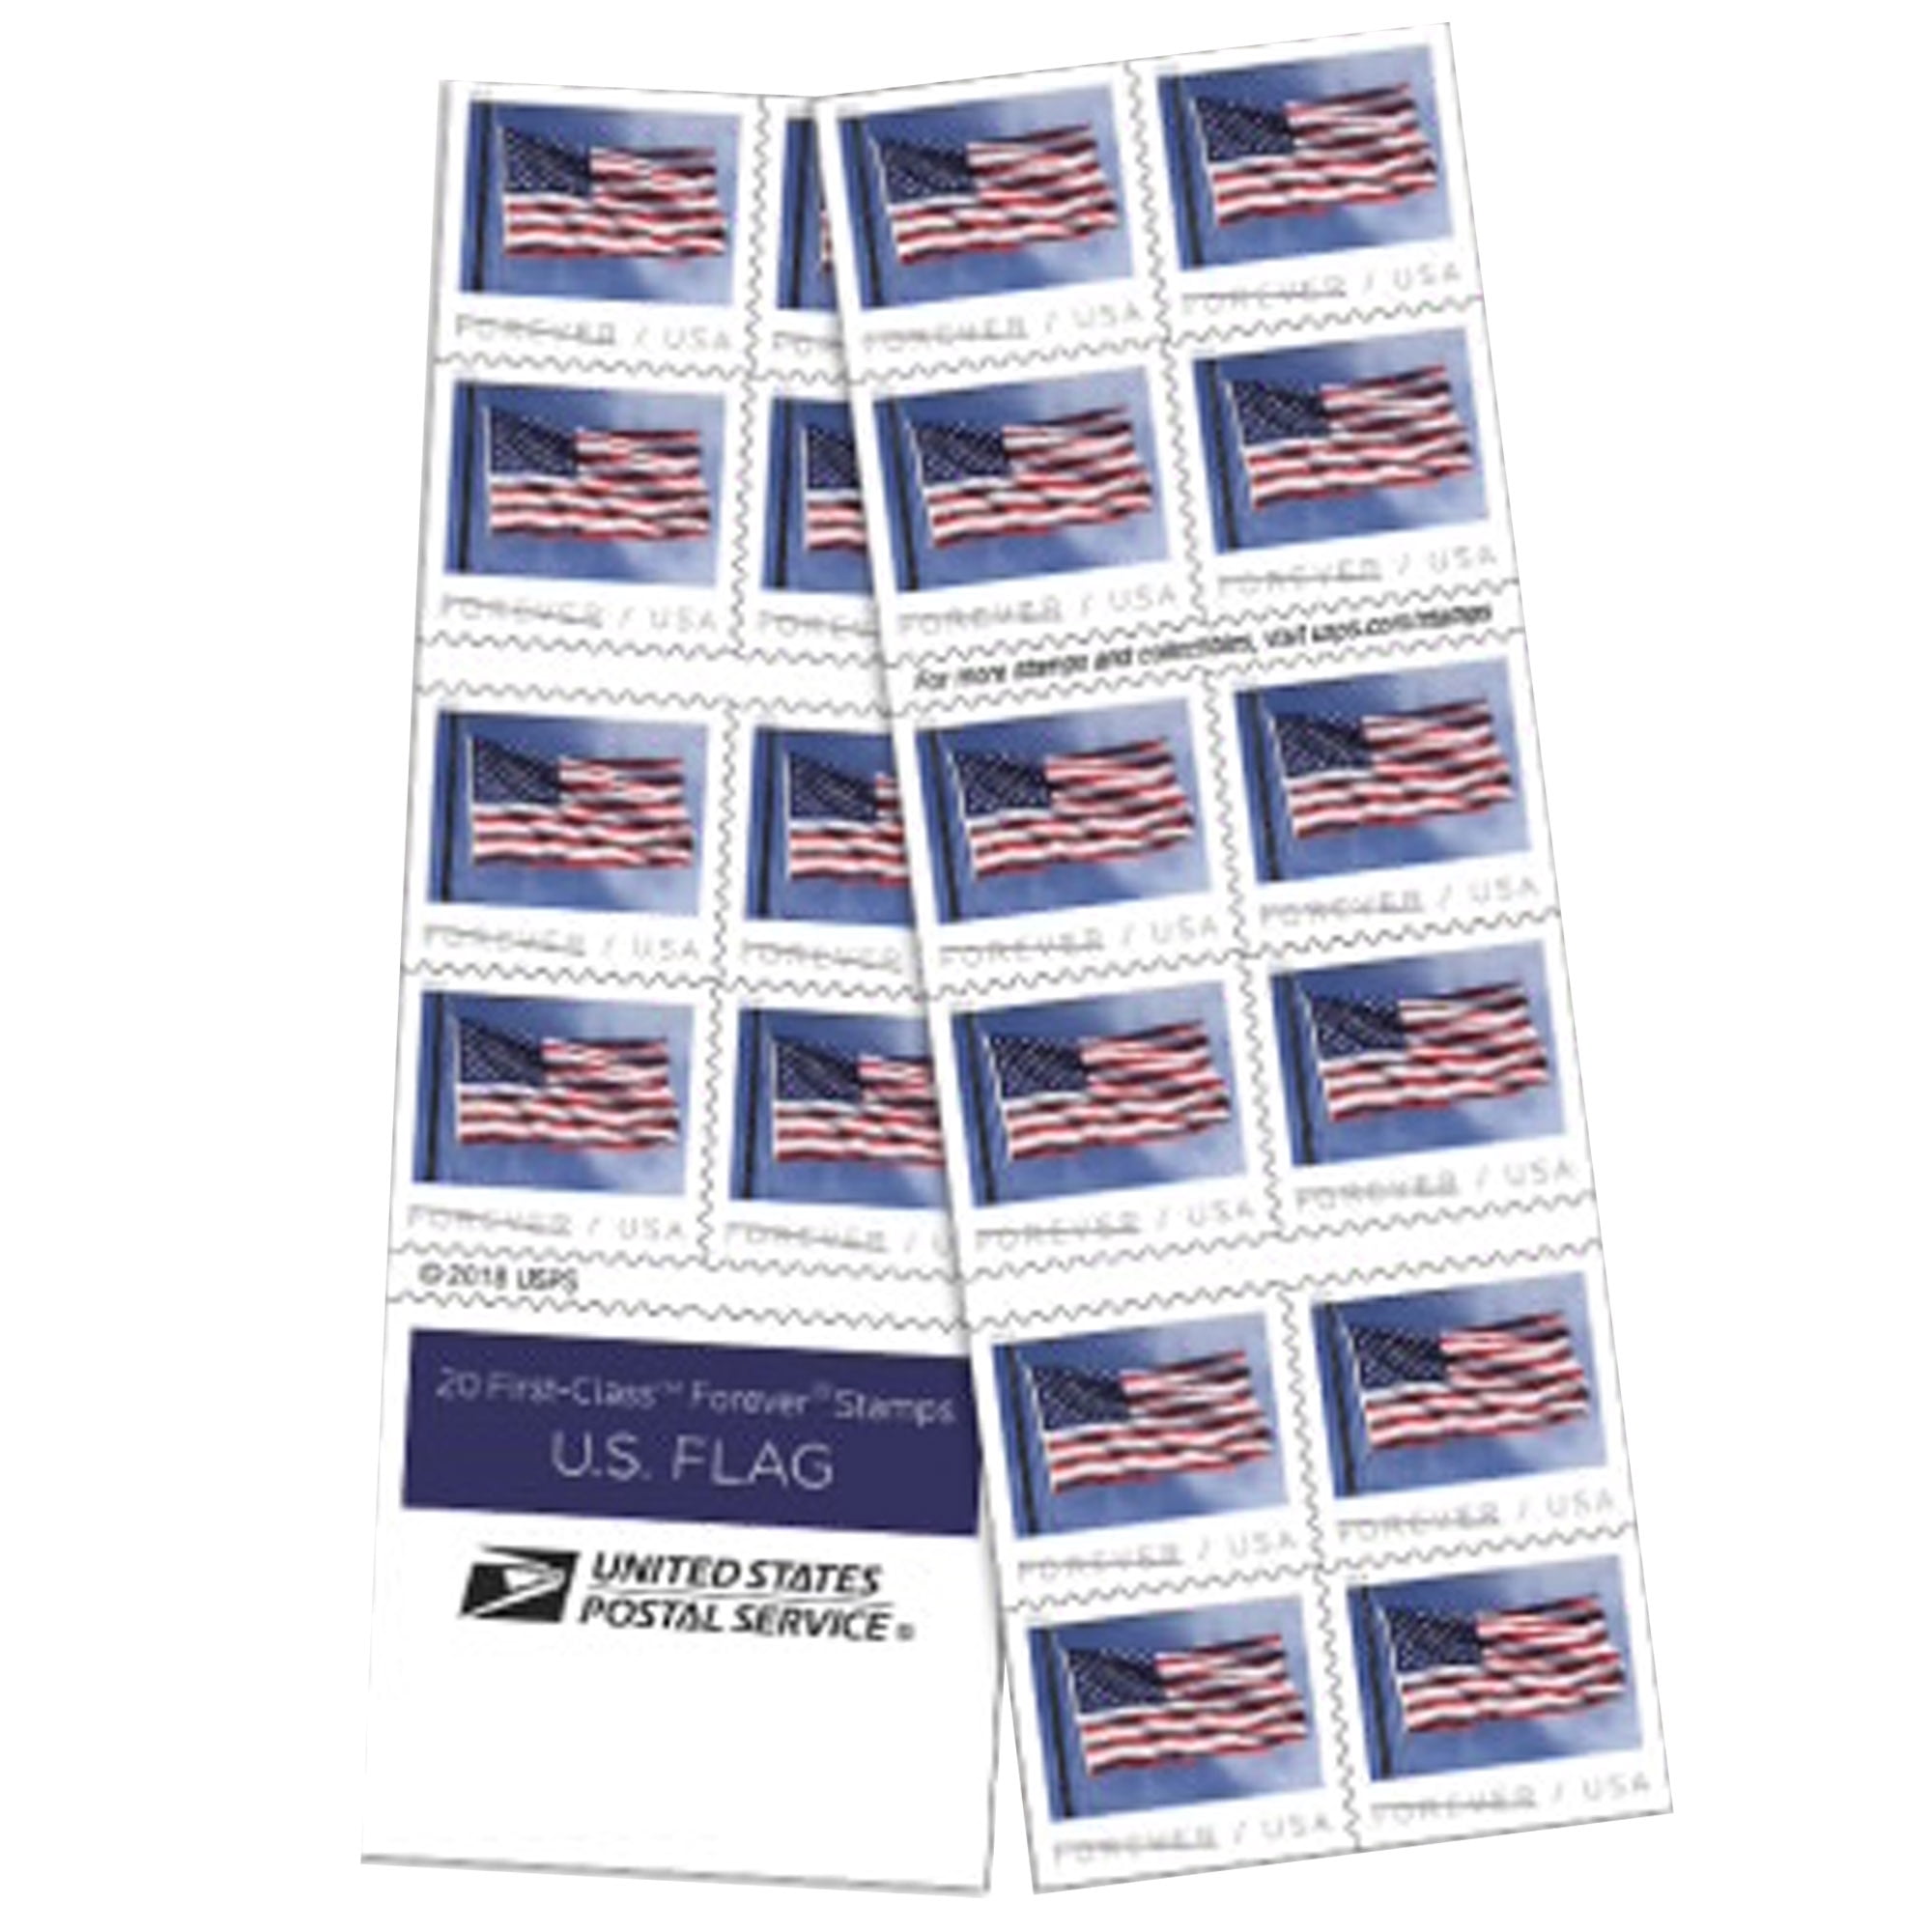 Flag 2018, Discounted Forever Stamps